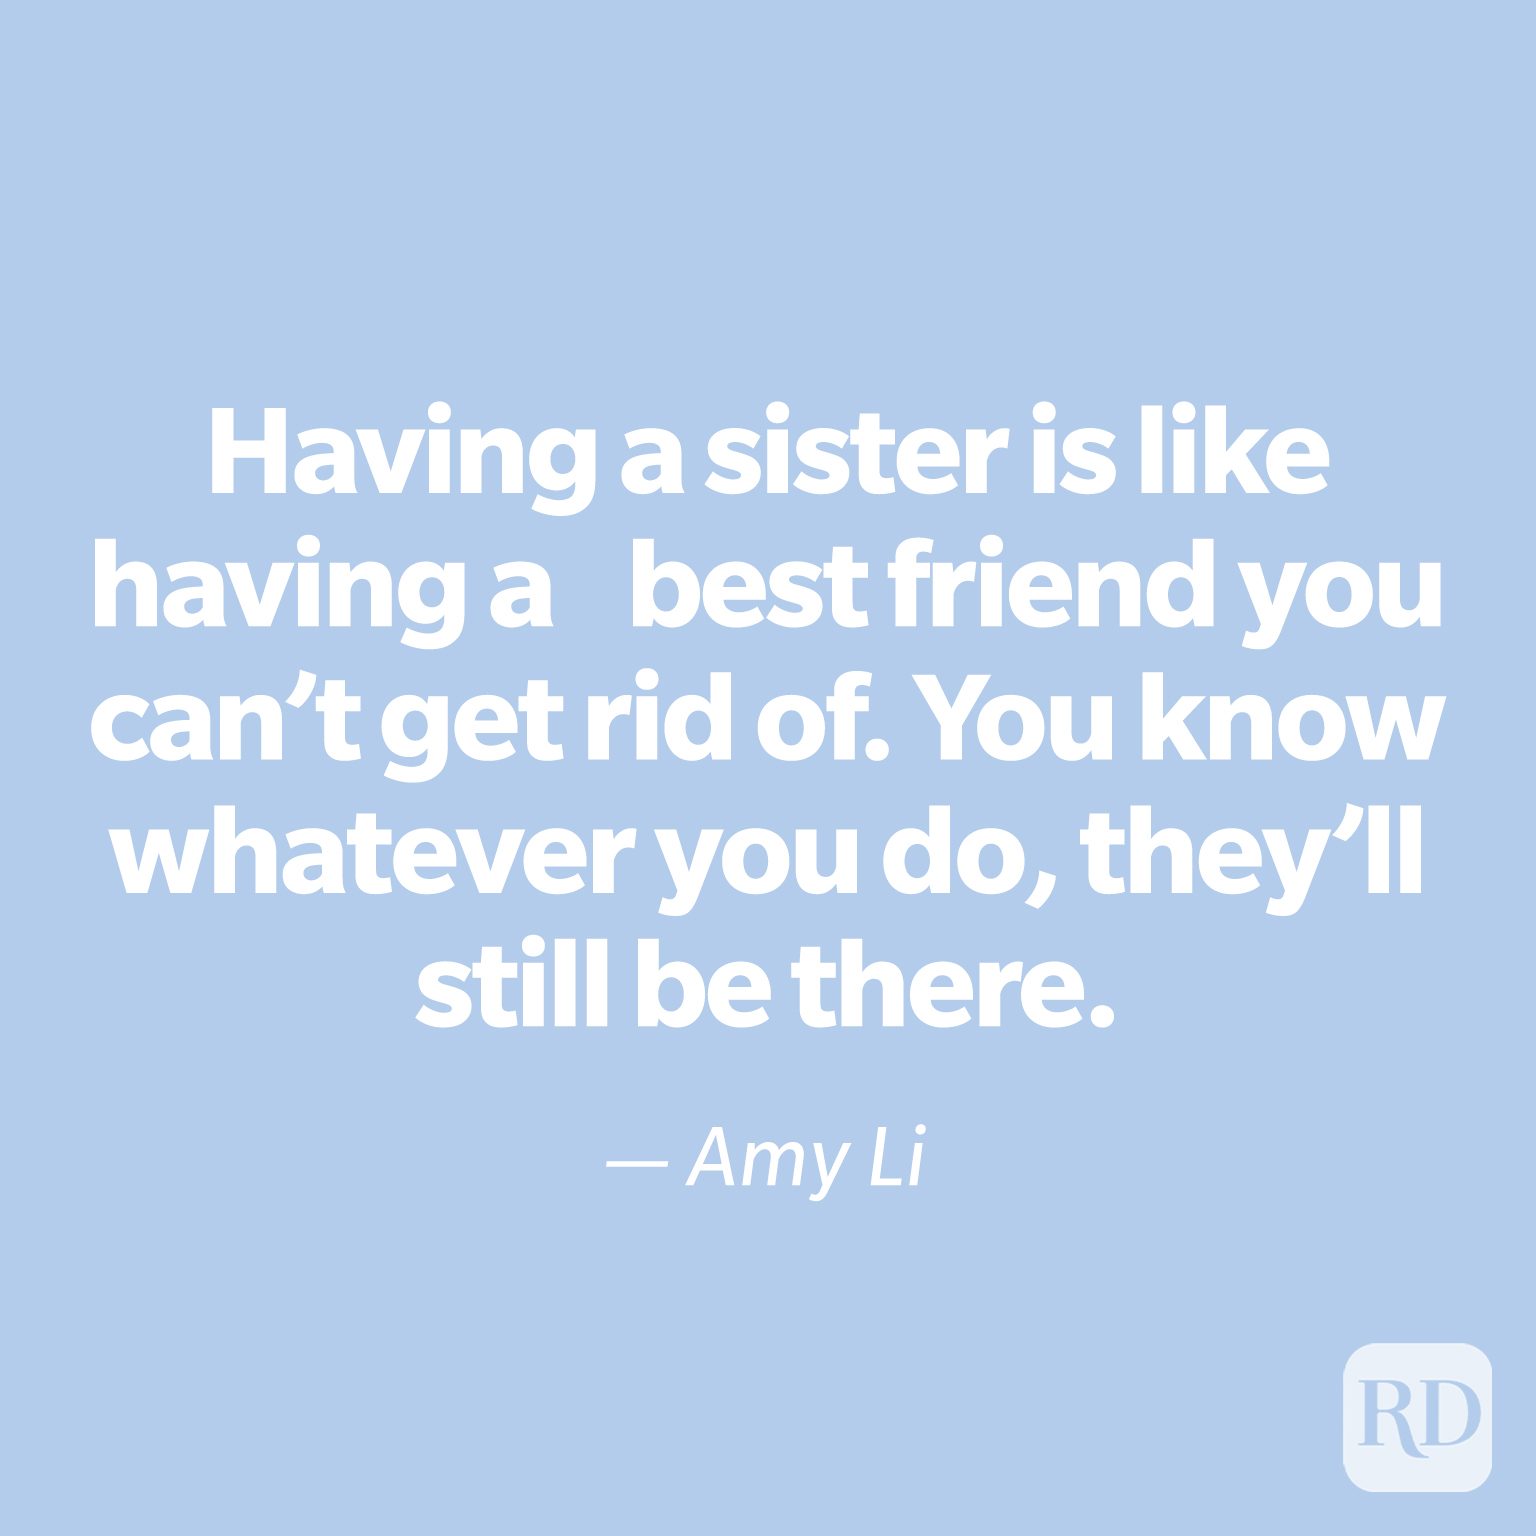 55 Best Sister Quotes to Share in 2023: Funny Sister Quotes